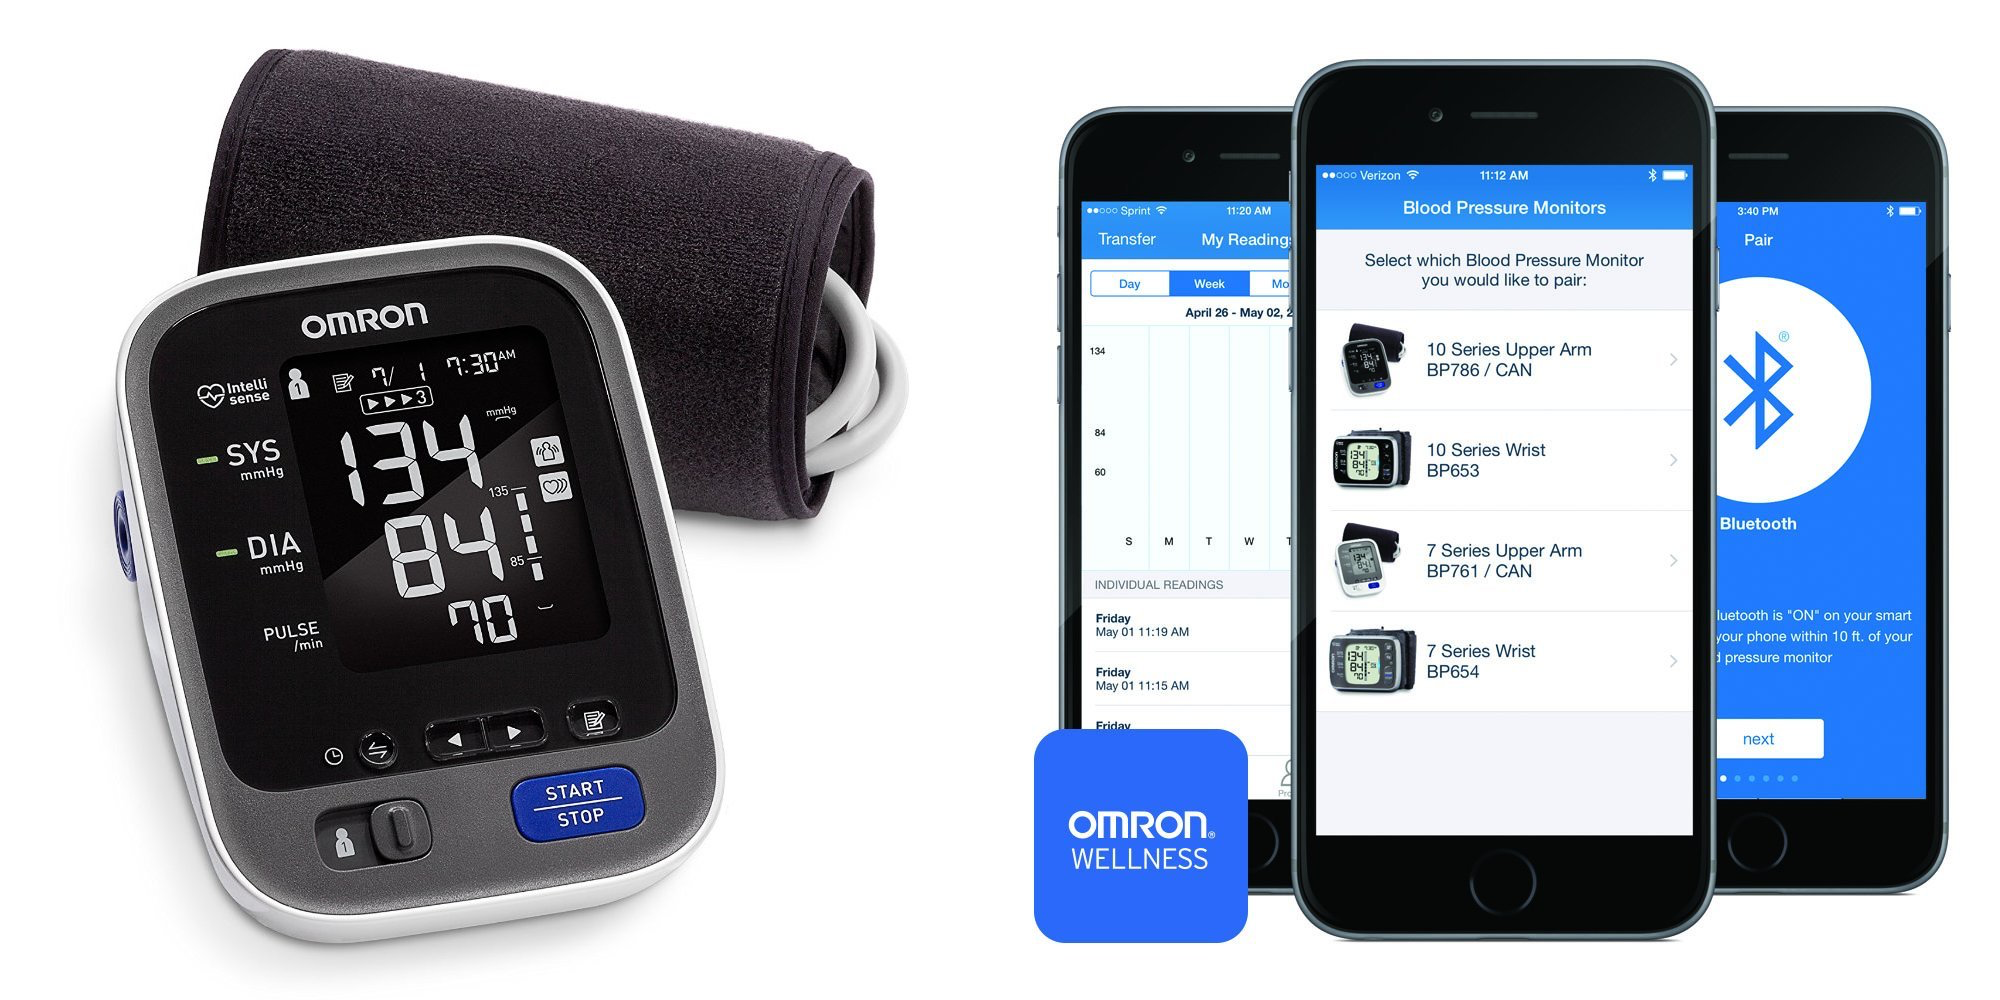 Omron 7 Series Wireless Upper Arm Blood Pressure Monitor with Cuff that  fits Standard and Large Arms BP761 with Bluetooth Smart Connectivity 